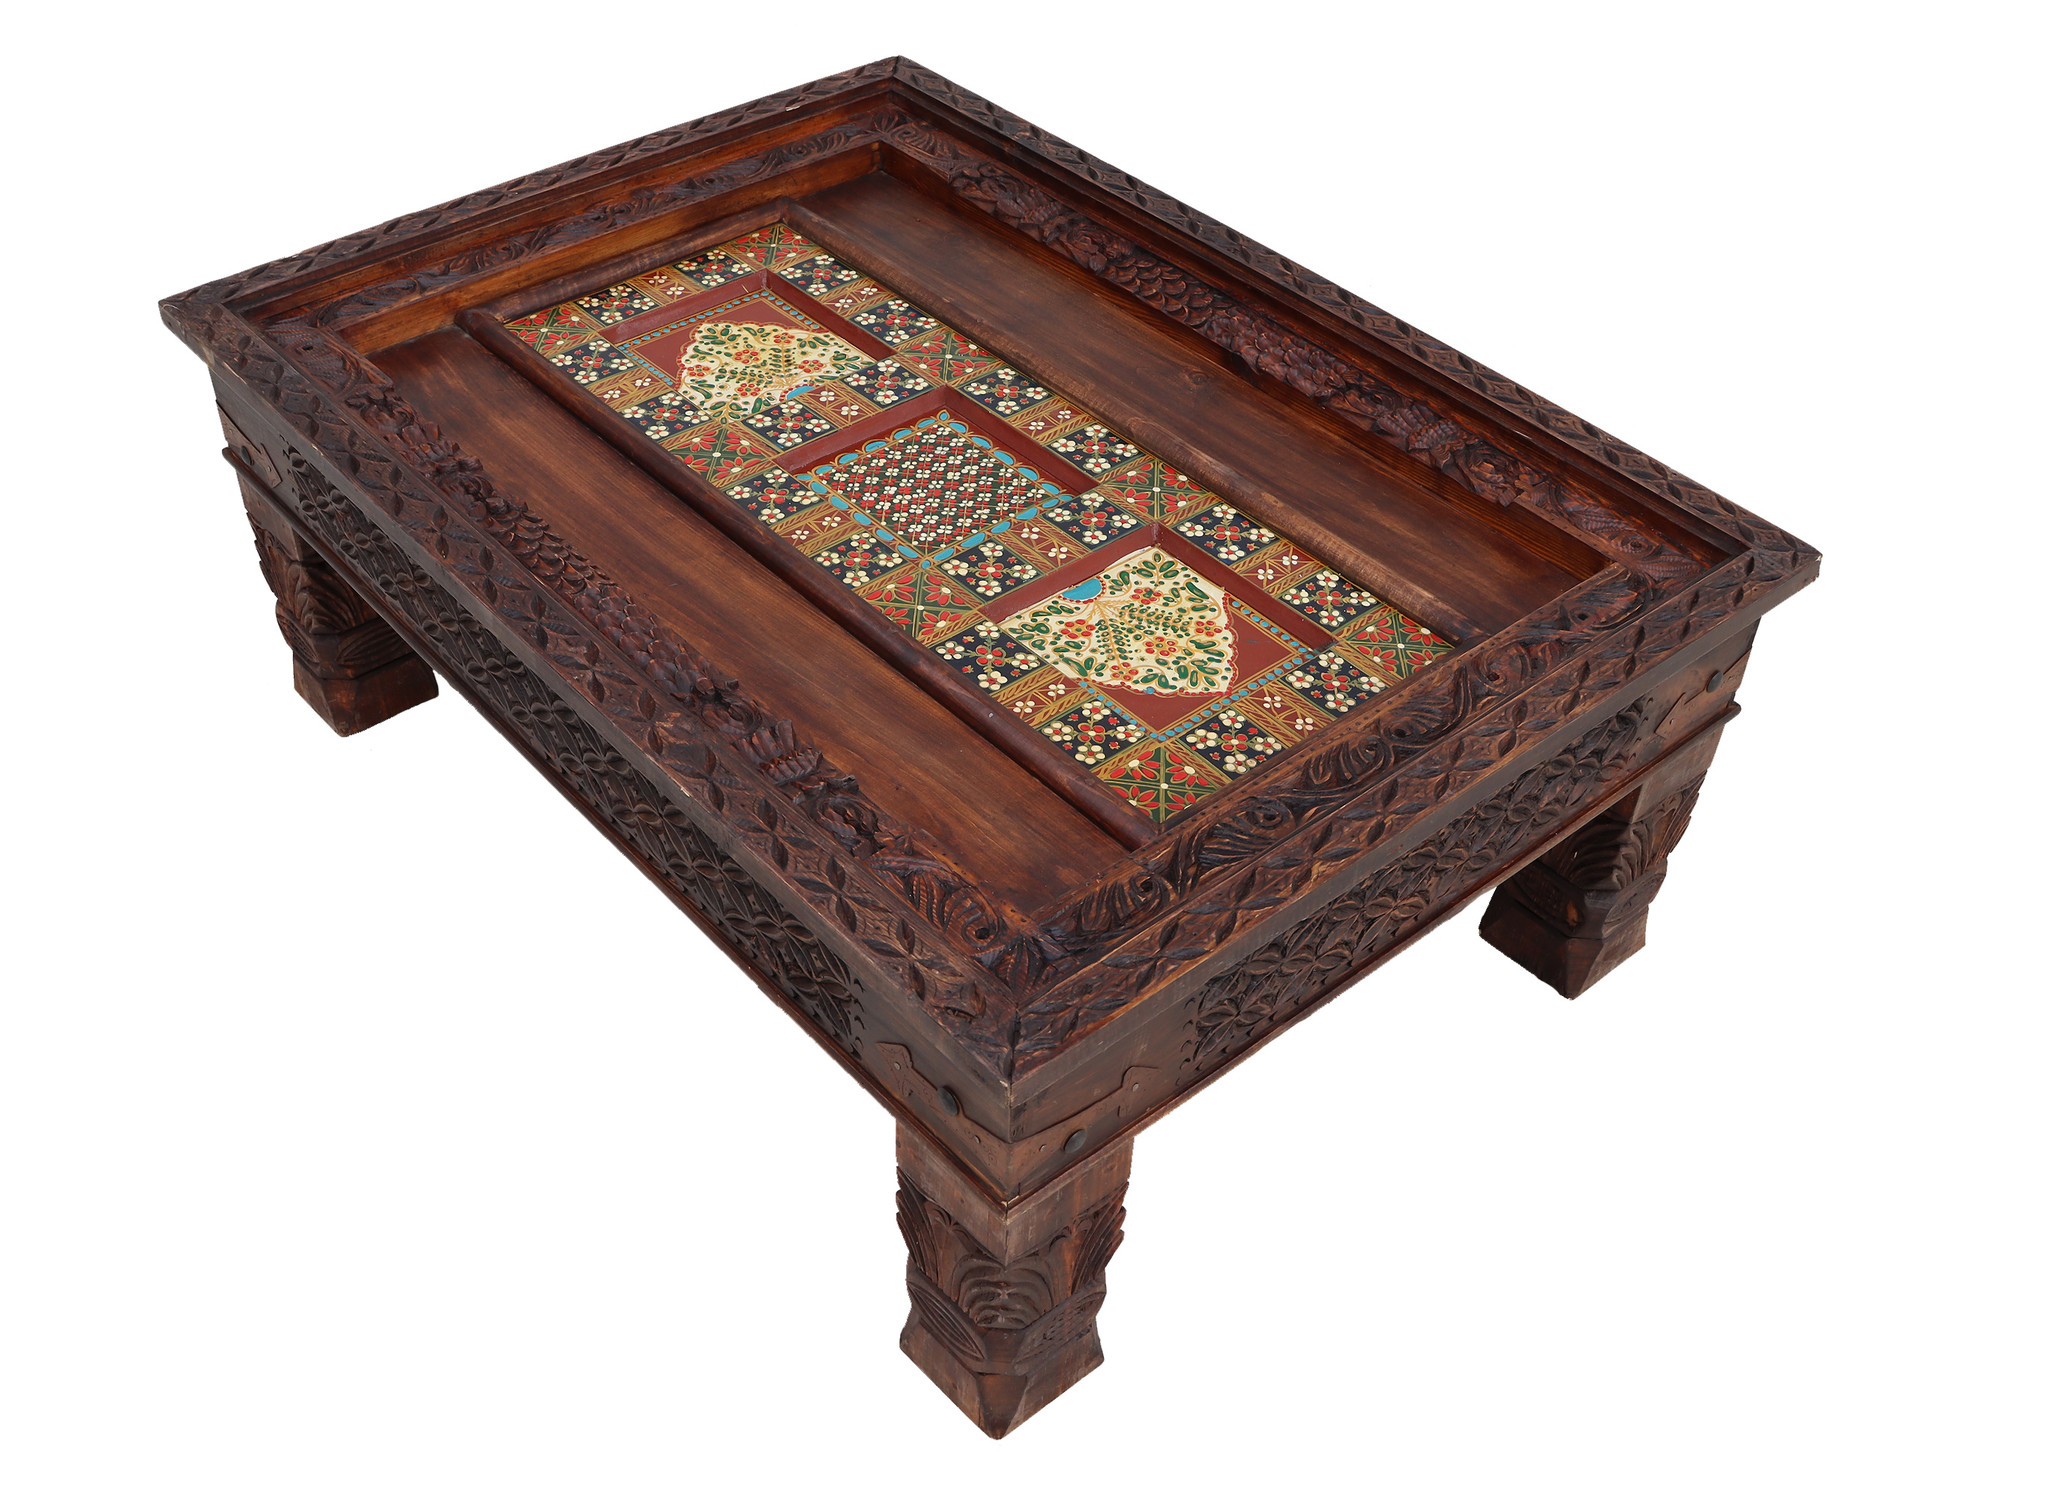 120x90 cm cm antique-look orient colonial solid wood hand-carved  table  Coffee Table   from Afghanistan nuristan 23-AA